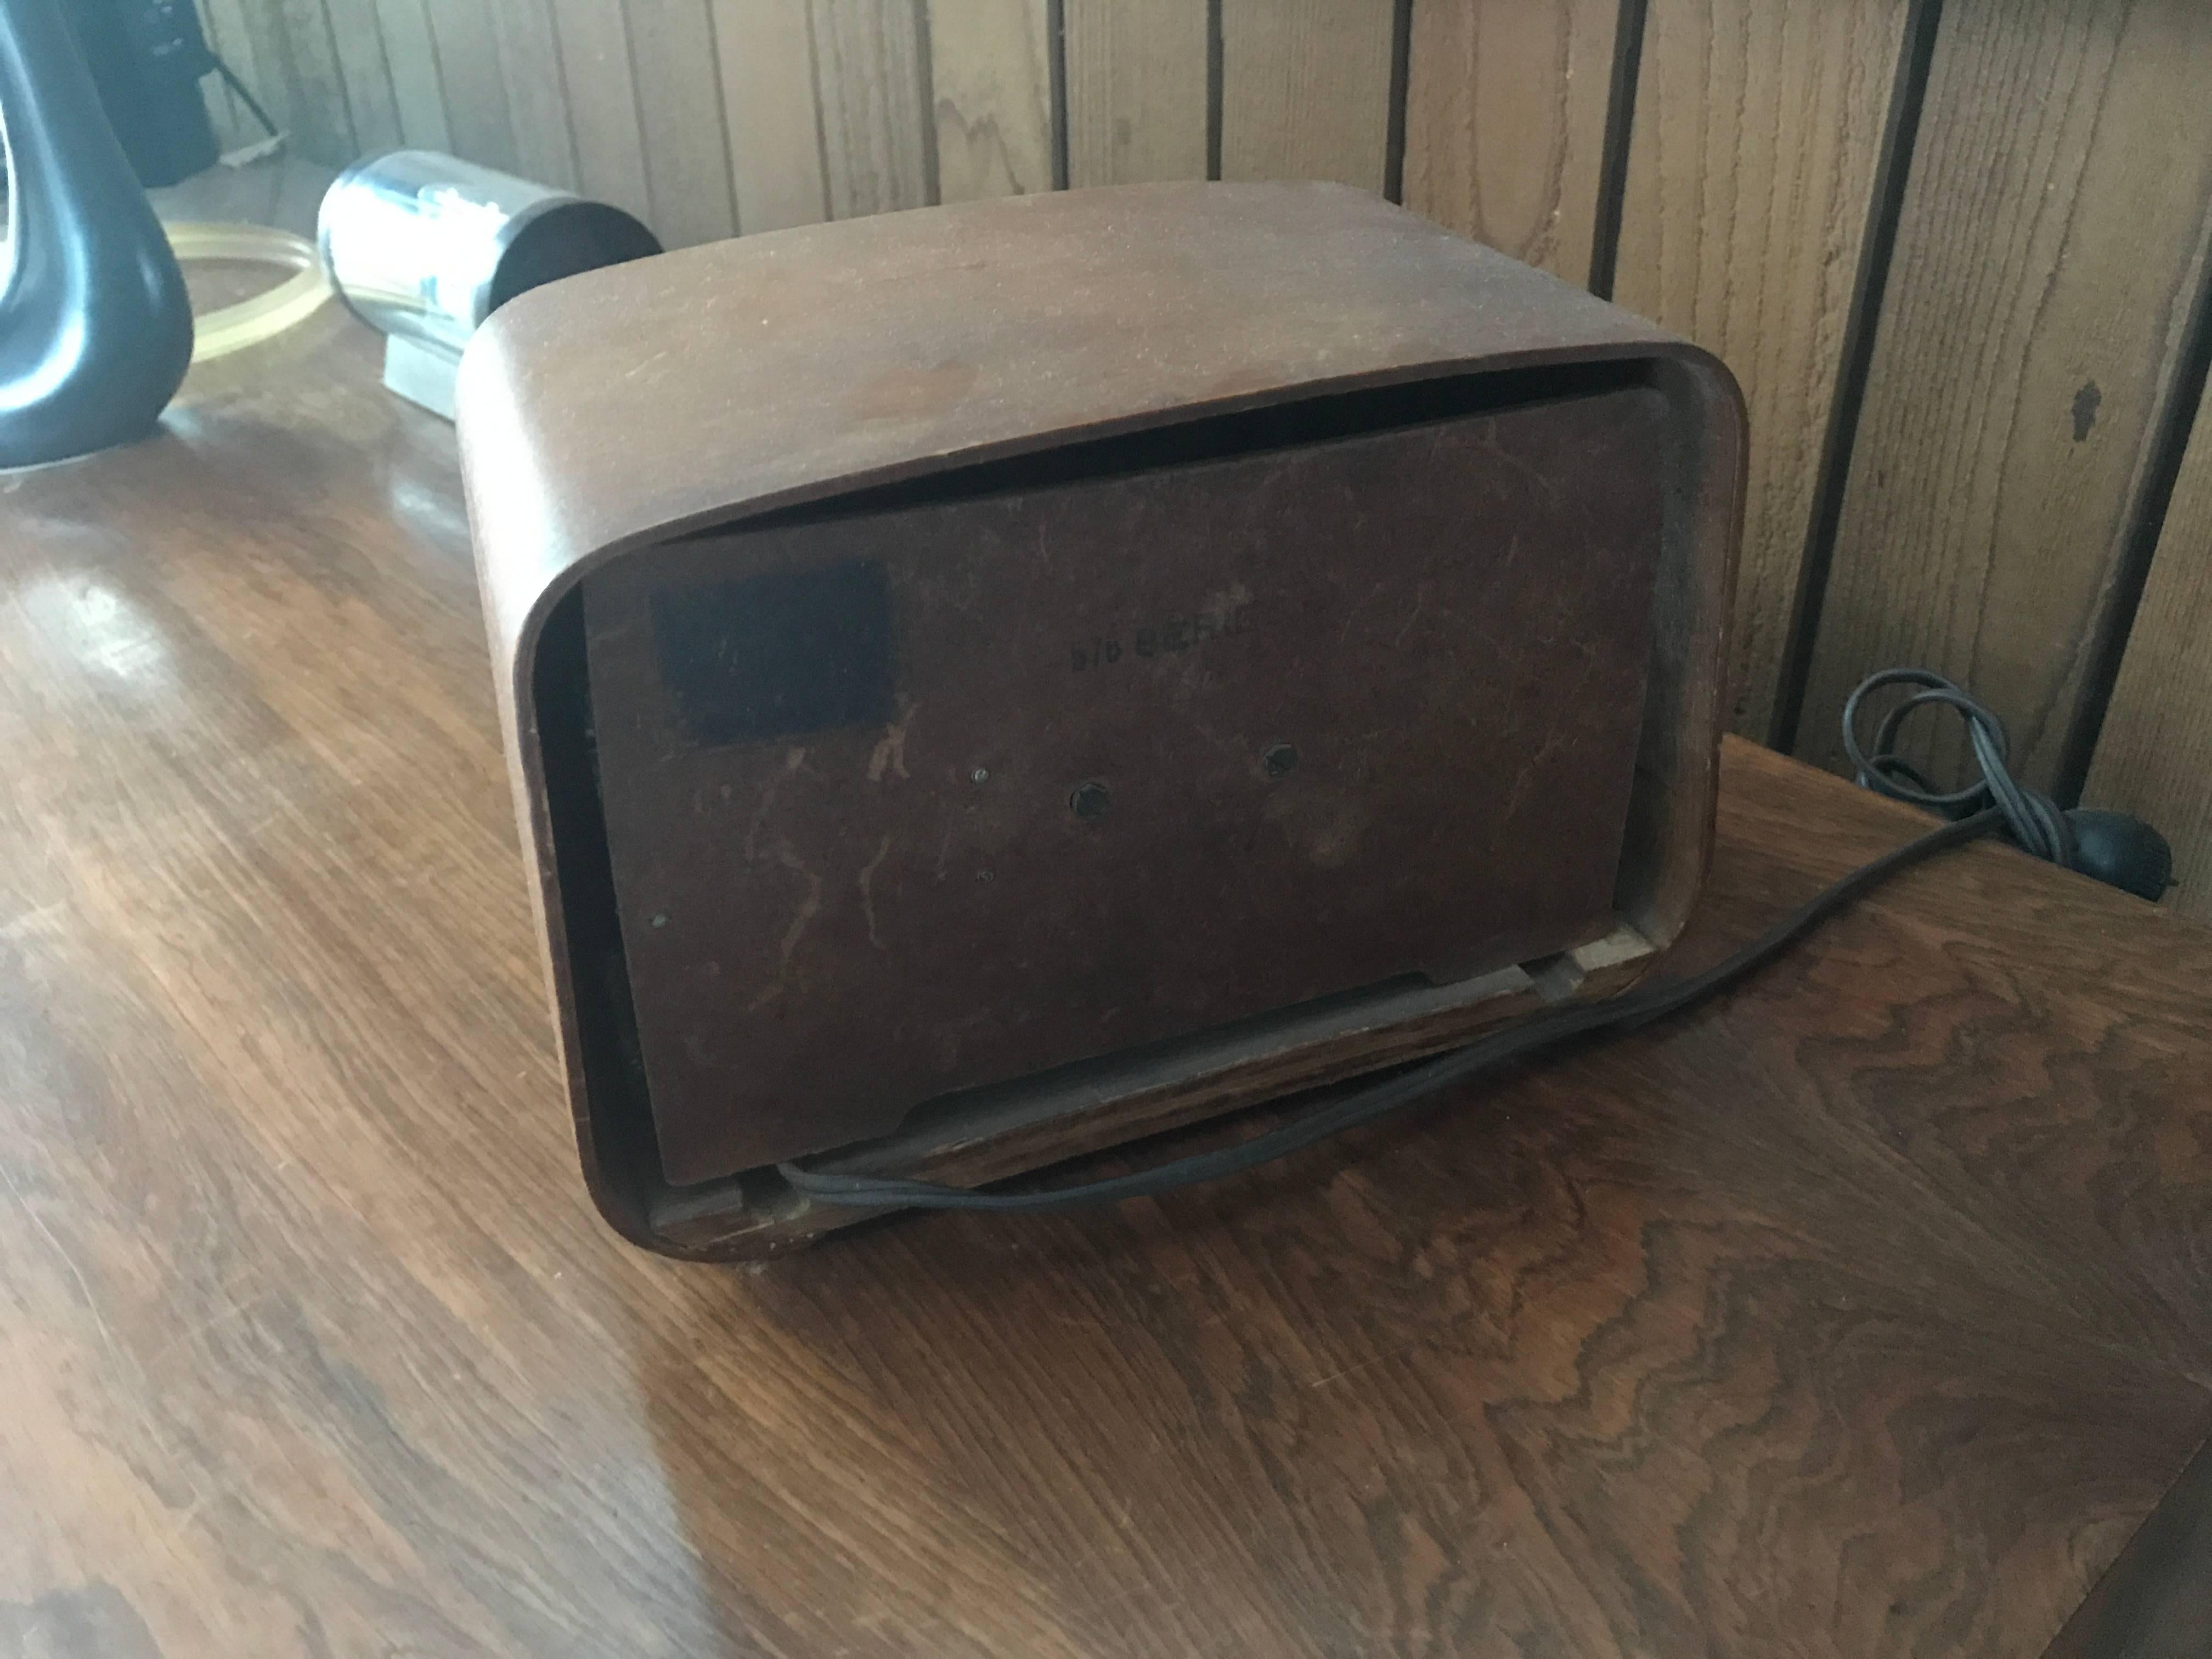 Early Charles and Ray Eames Plywood Evans Emerson Radio In Excellent Condition For Sale In Salt Lake City, UT